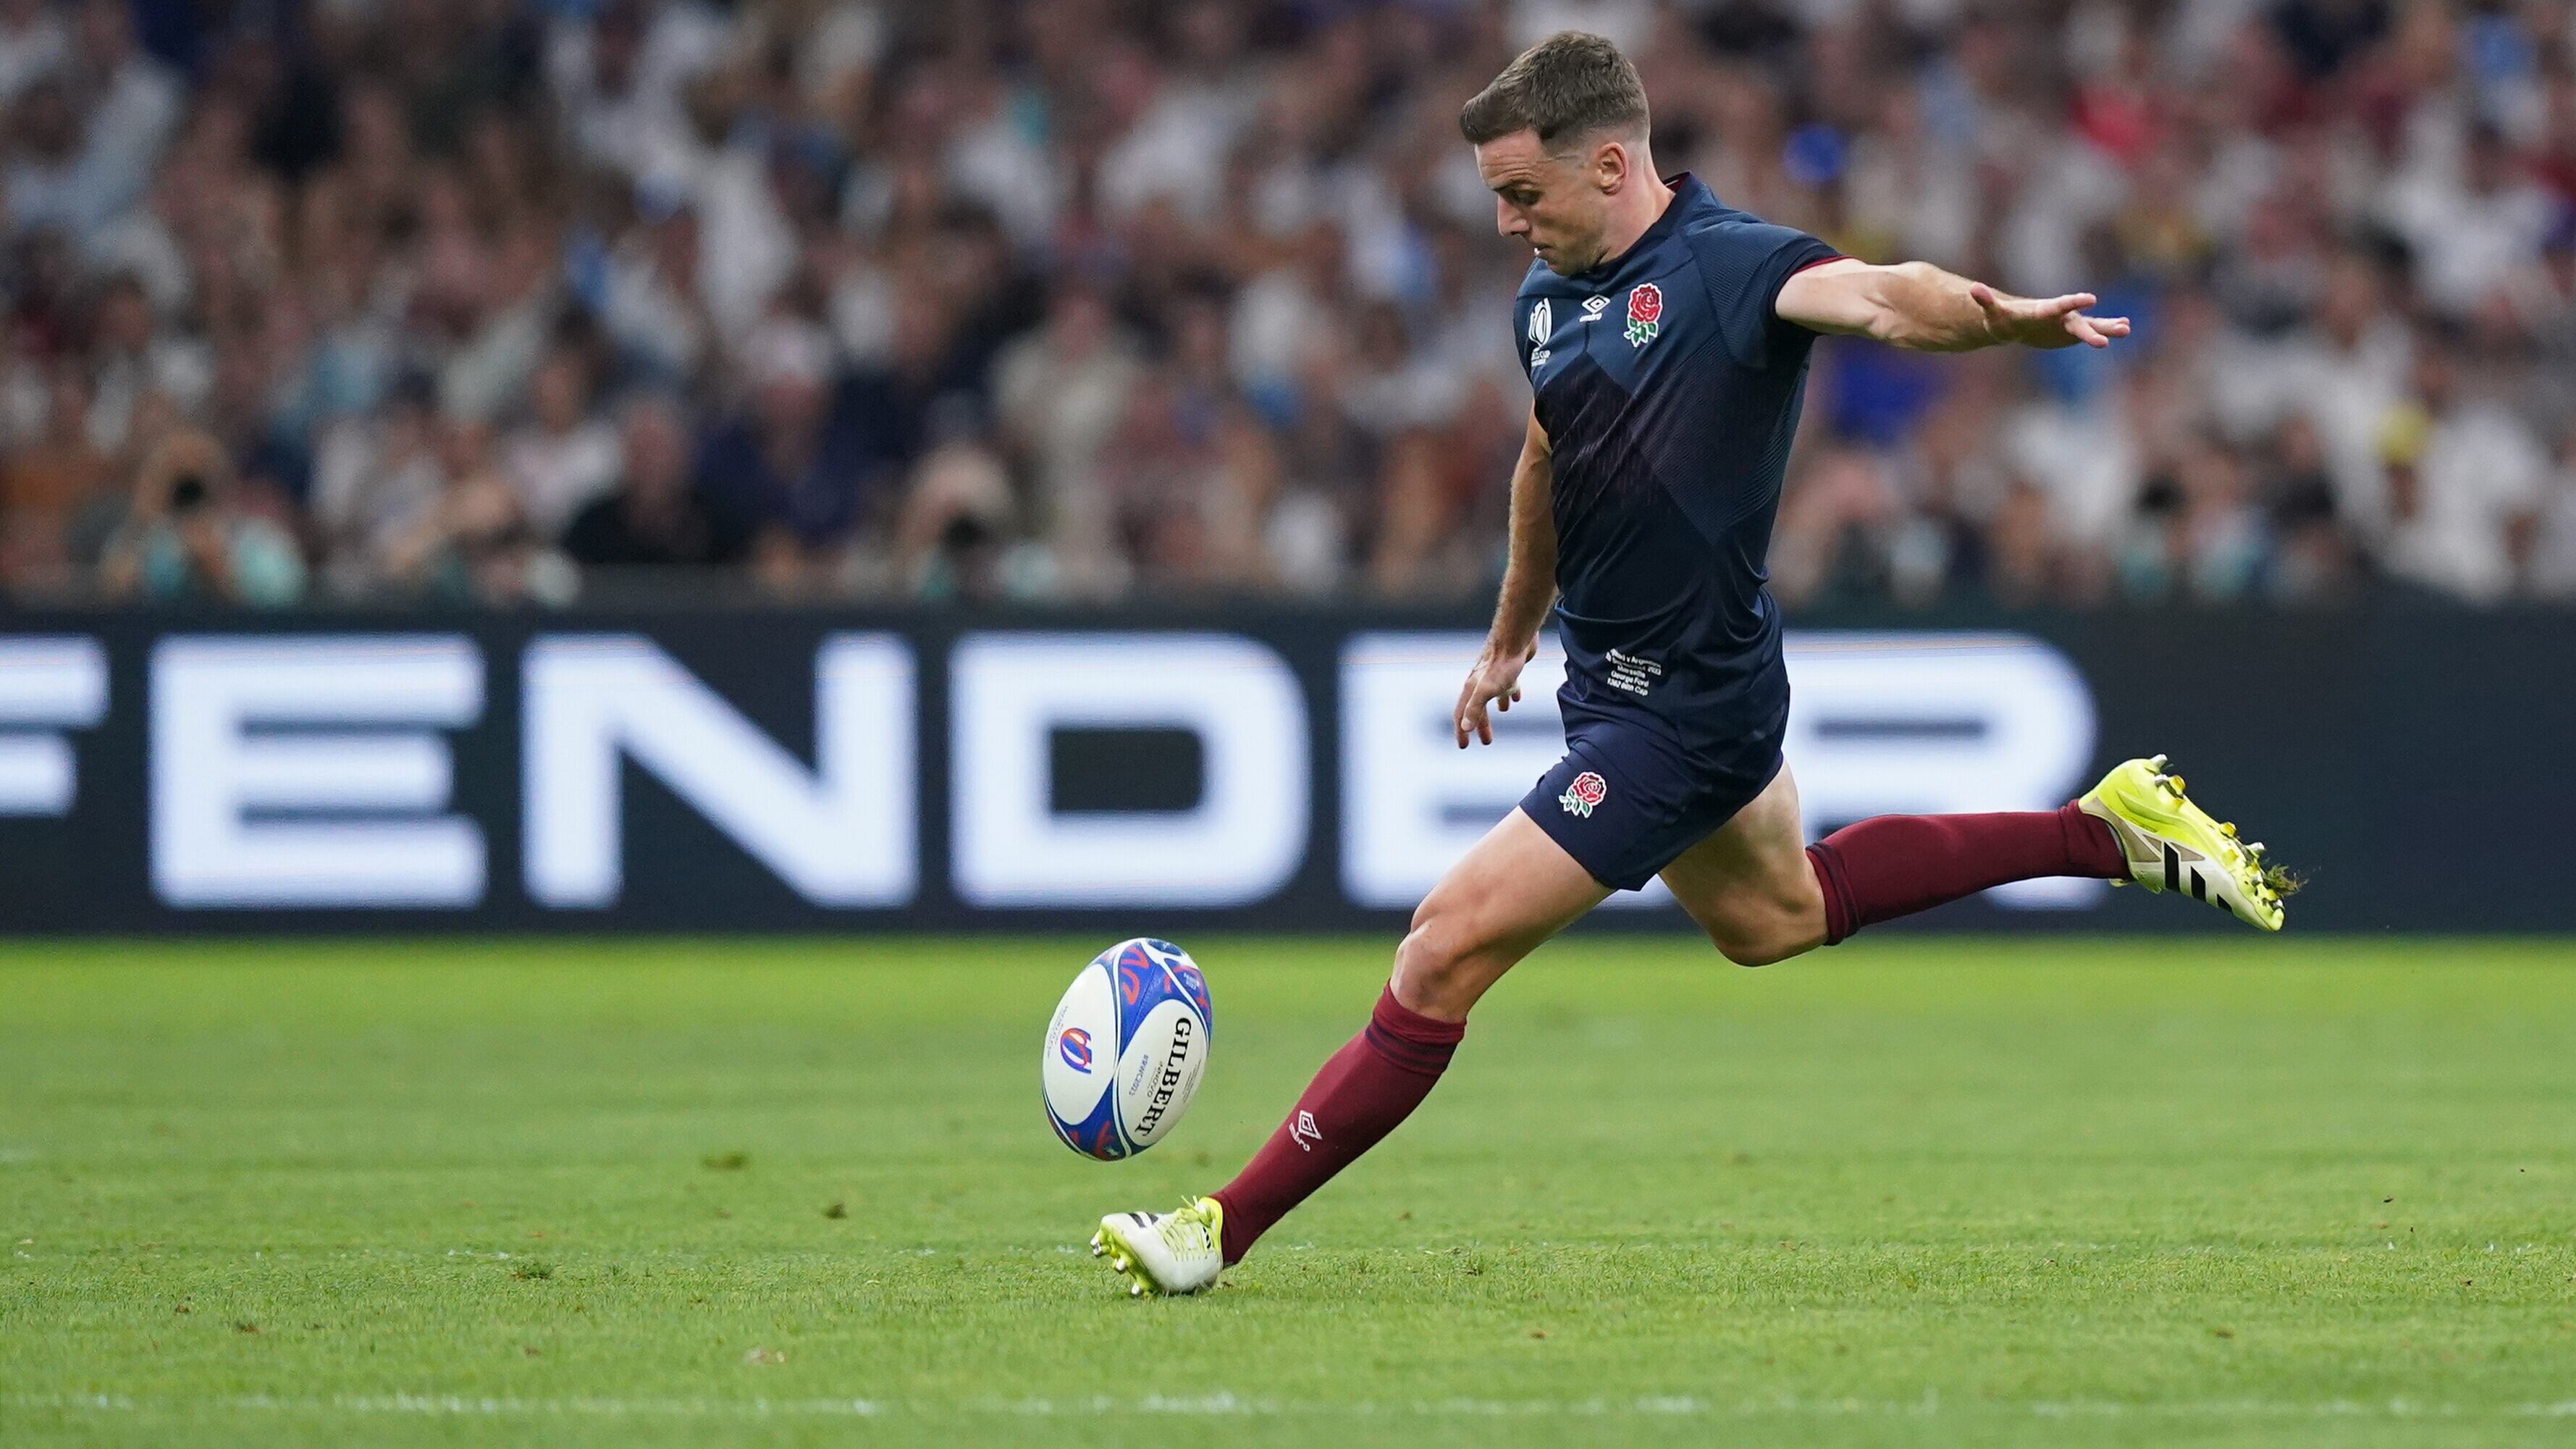 George Ford was determined to overhaul Danny Care’s record of drop goals (Mike Egerton/PA)